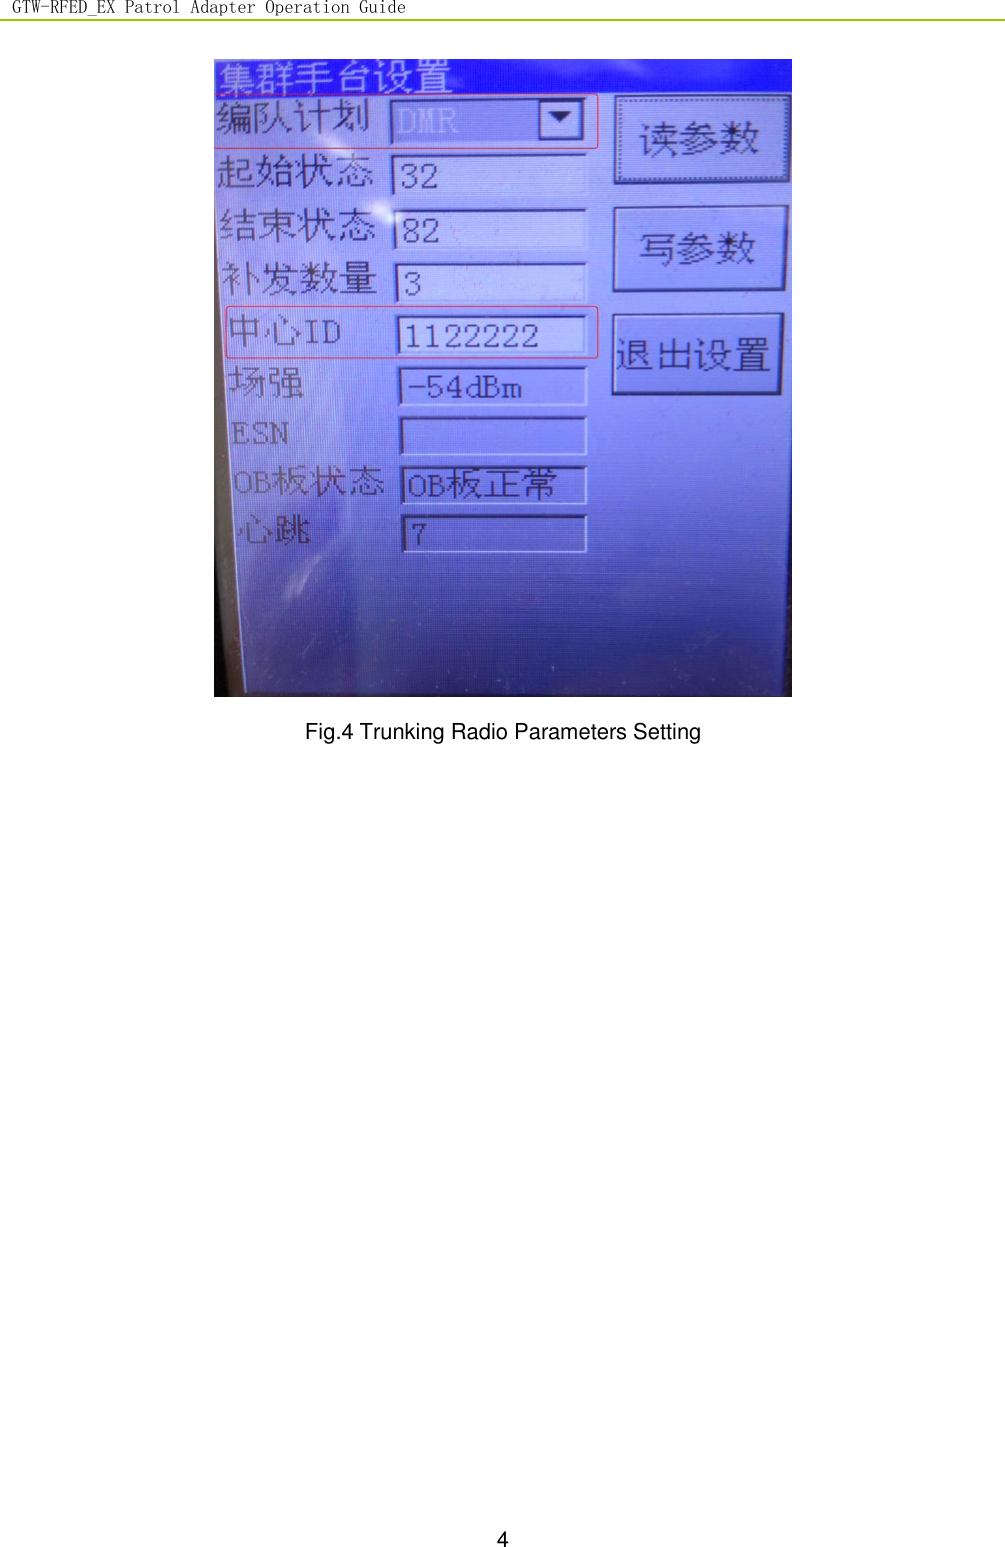 GTW-RFED_EX Patrol Adapter Operation Guide    4   Fig.4 Trunking Radio Parameters Setting  